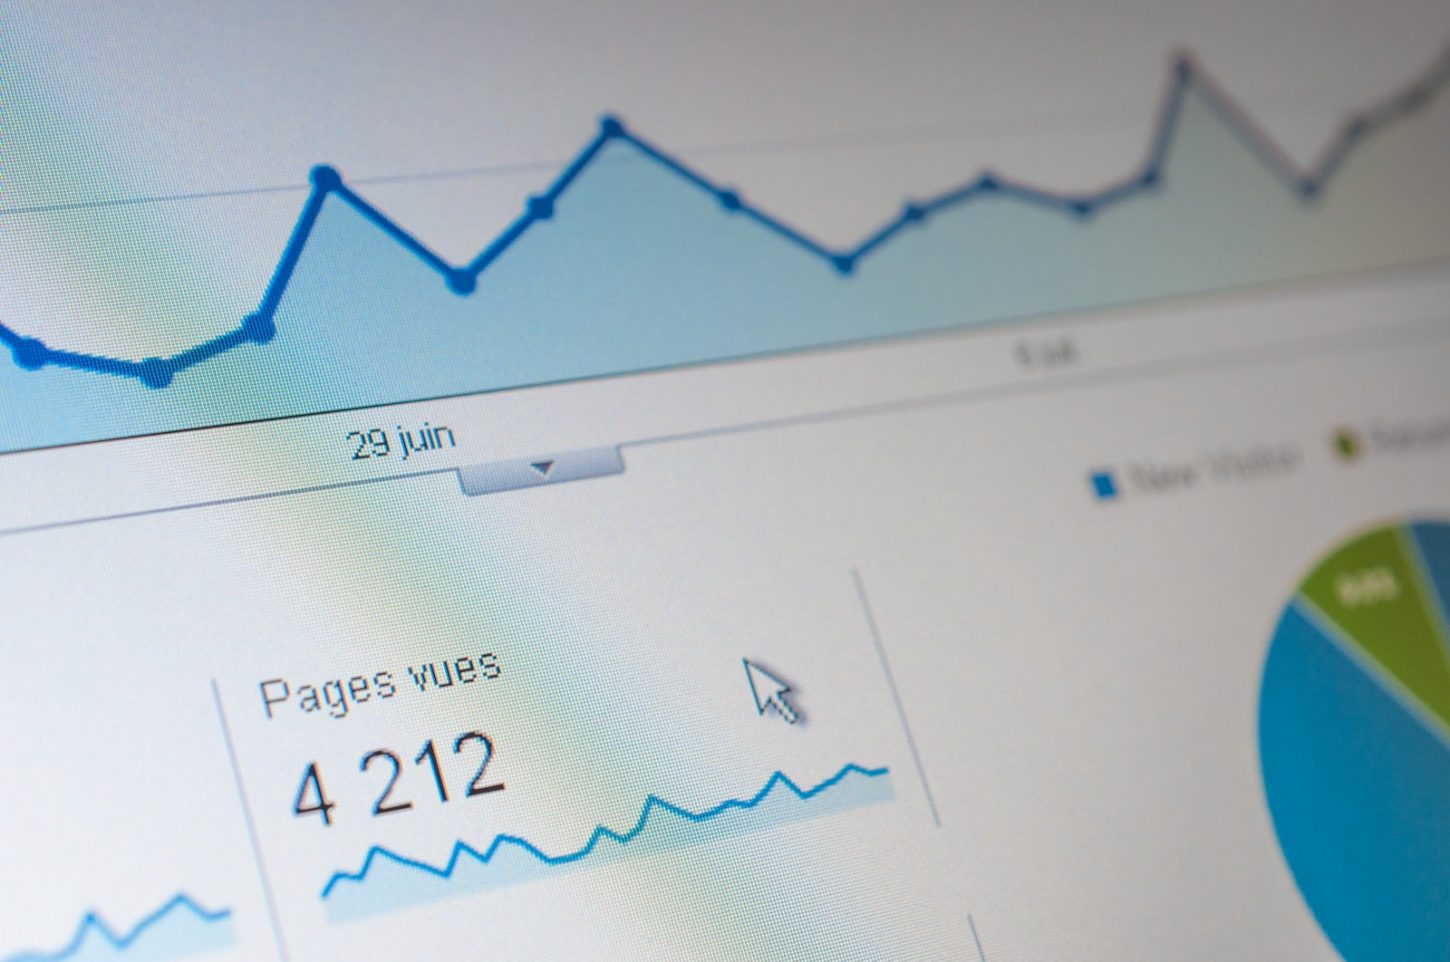 7 Excellent Ways to Drive Traffic to Your Website